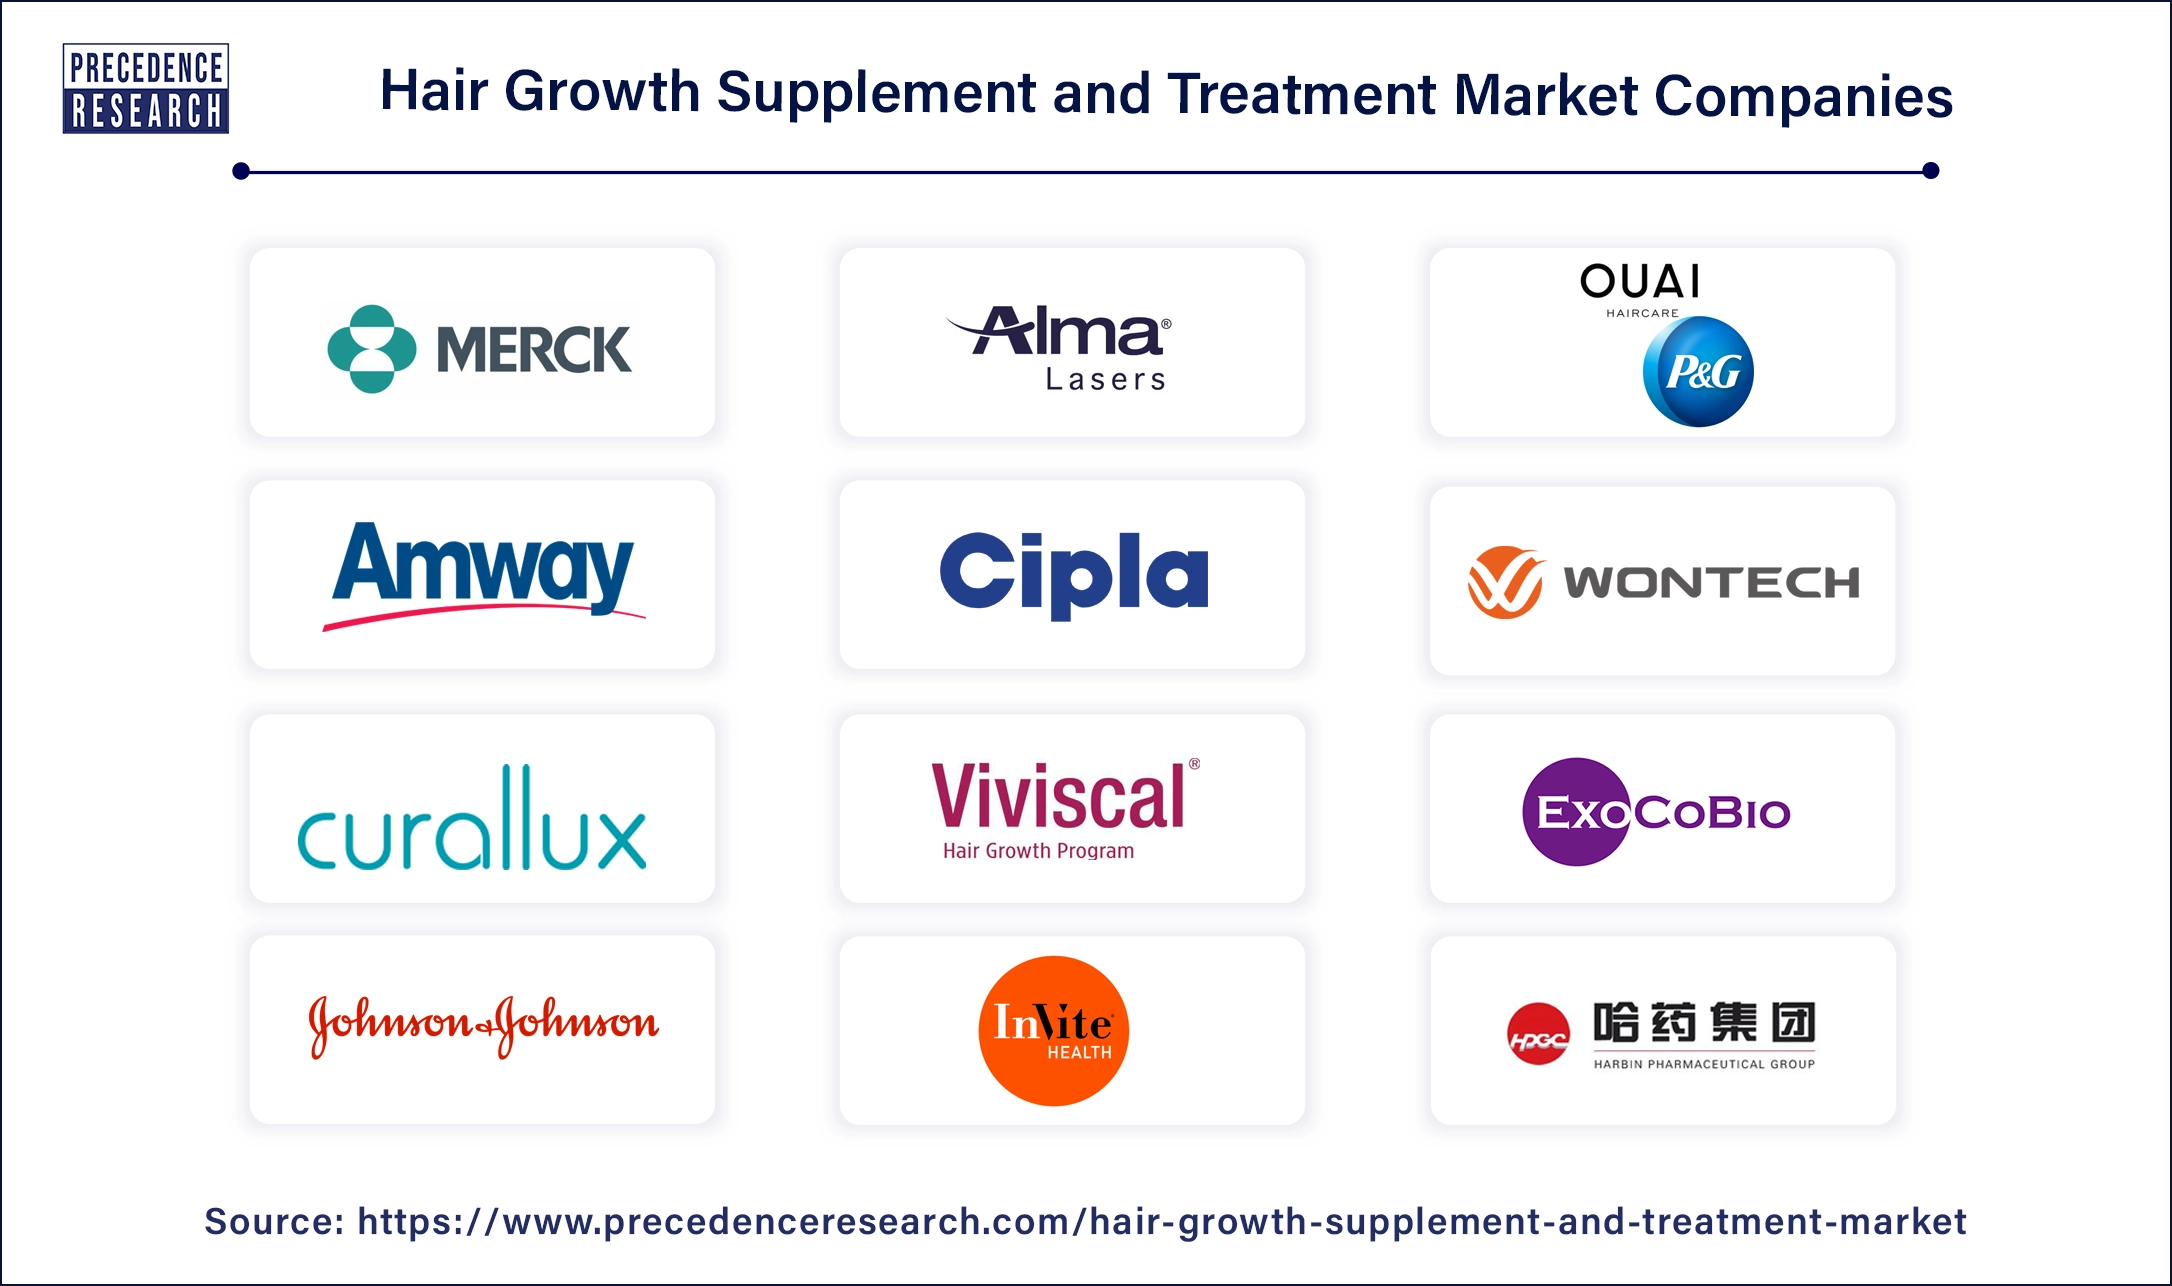 Hair Growth Supplement and Treatment Companies